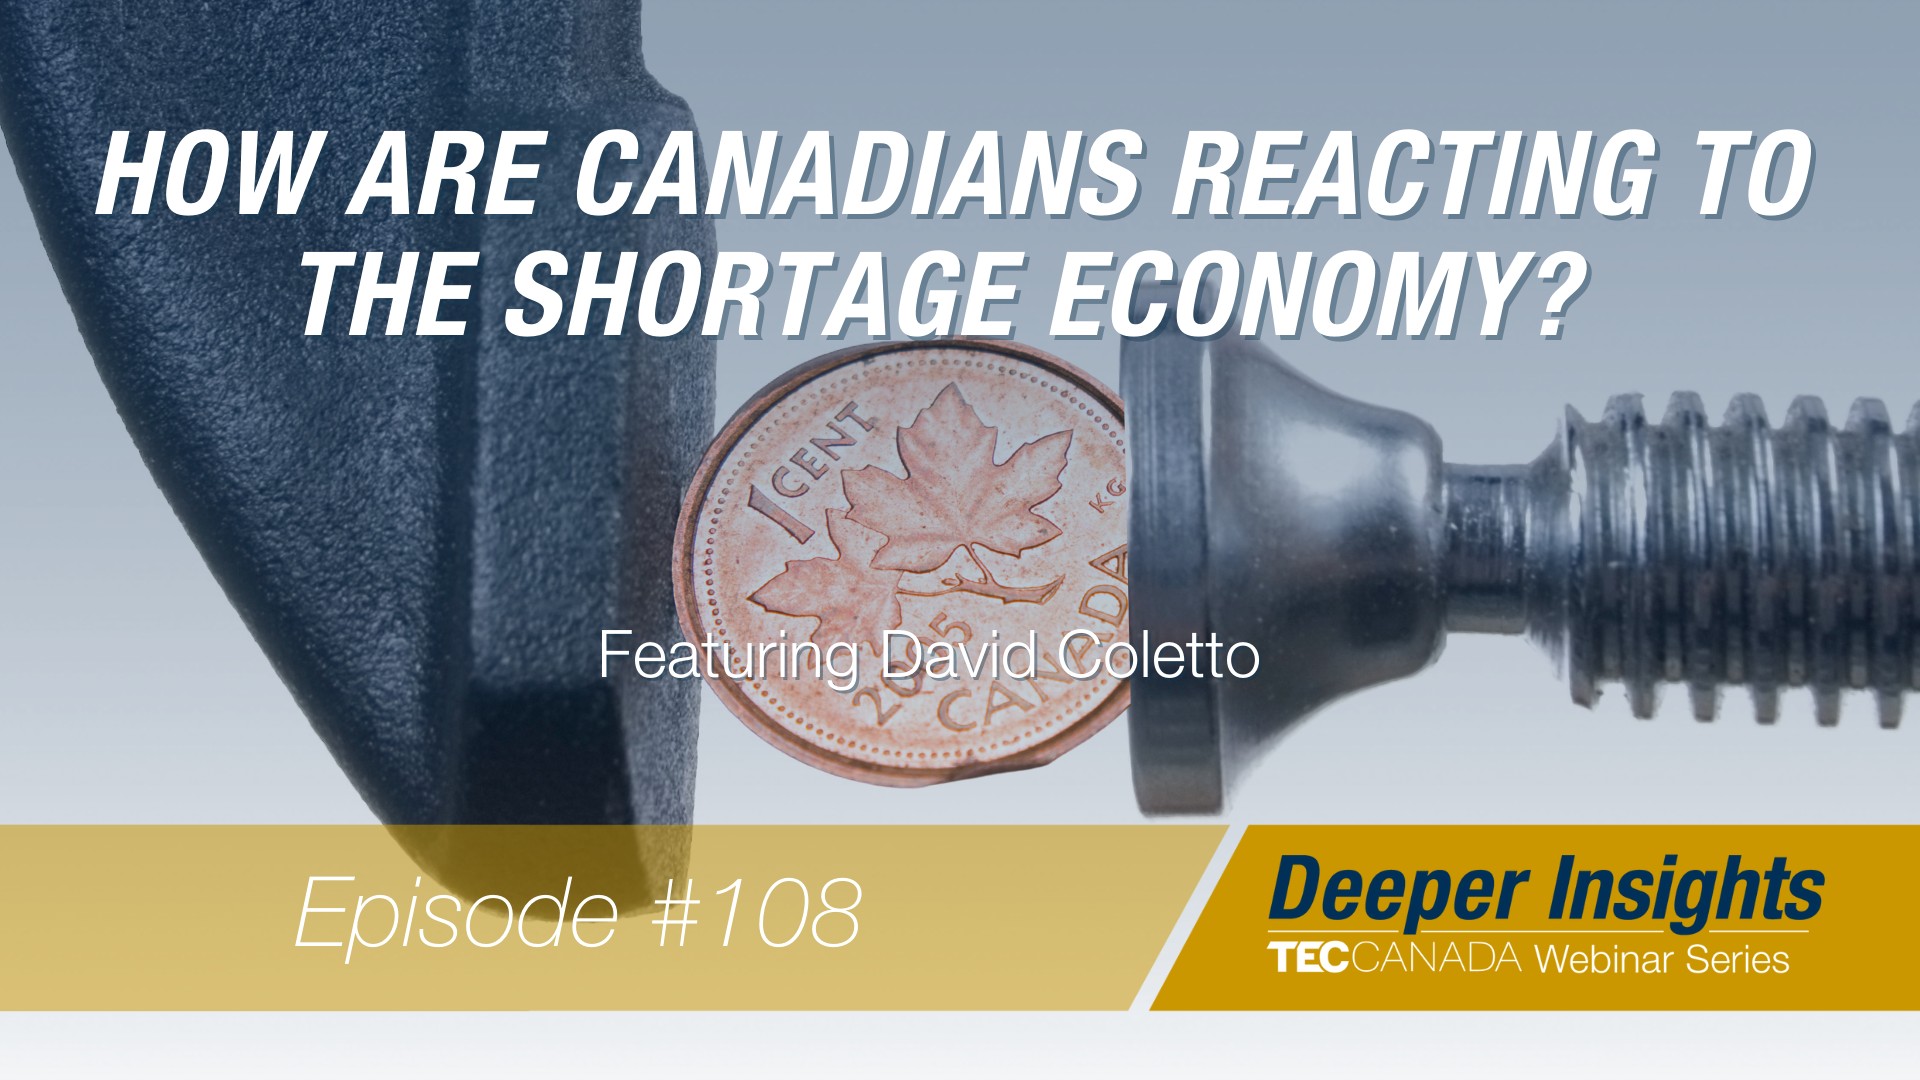 By watching the "How Are Canadians Reacting to the Shortage Economy?" webinar, viewers can expect to become equipped with deeper insights from David Coletto surrounding new public opinion data on the consumer and citizen mindset as the Canadian shortage economy heads into 2022.  